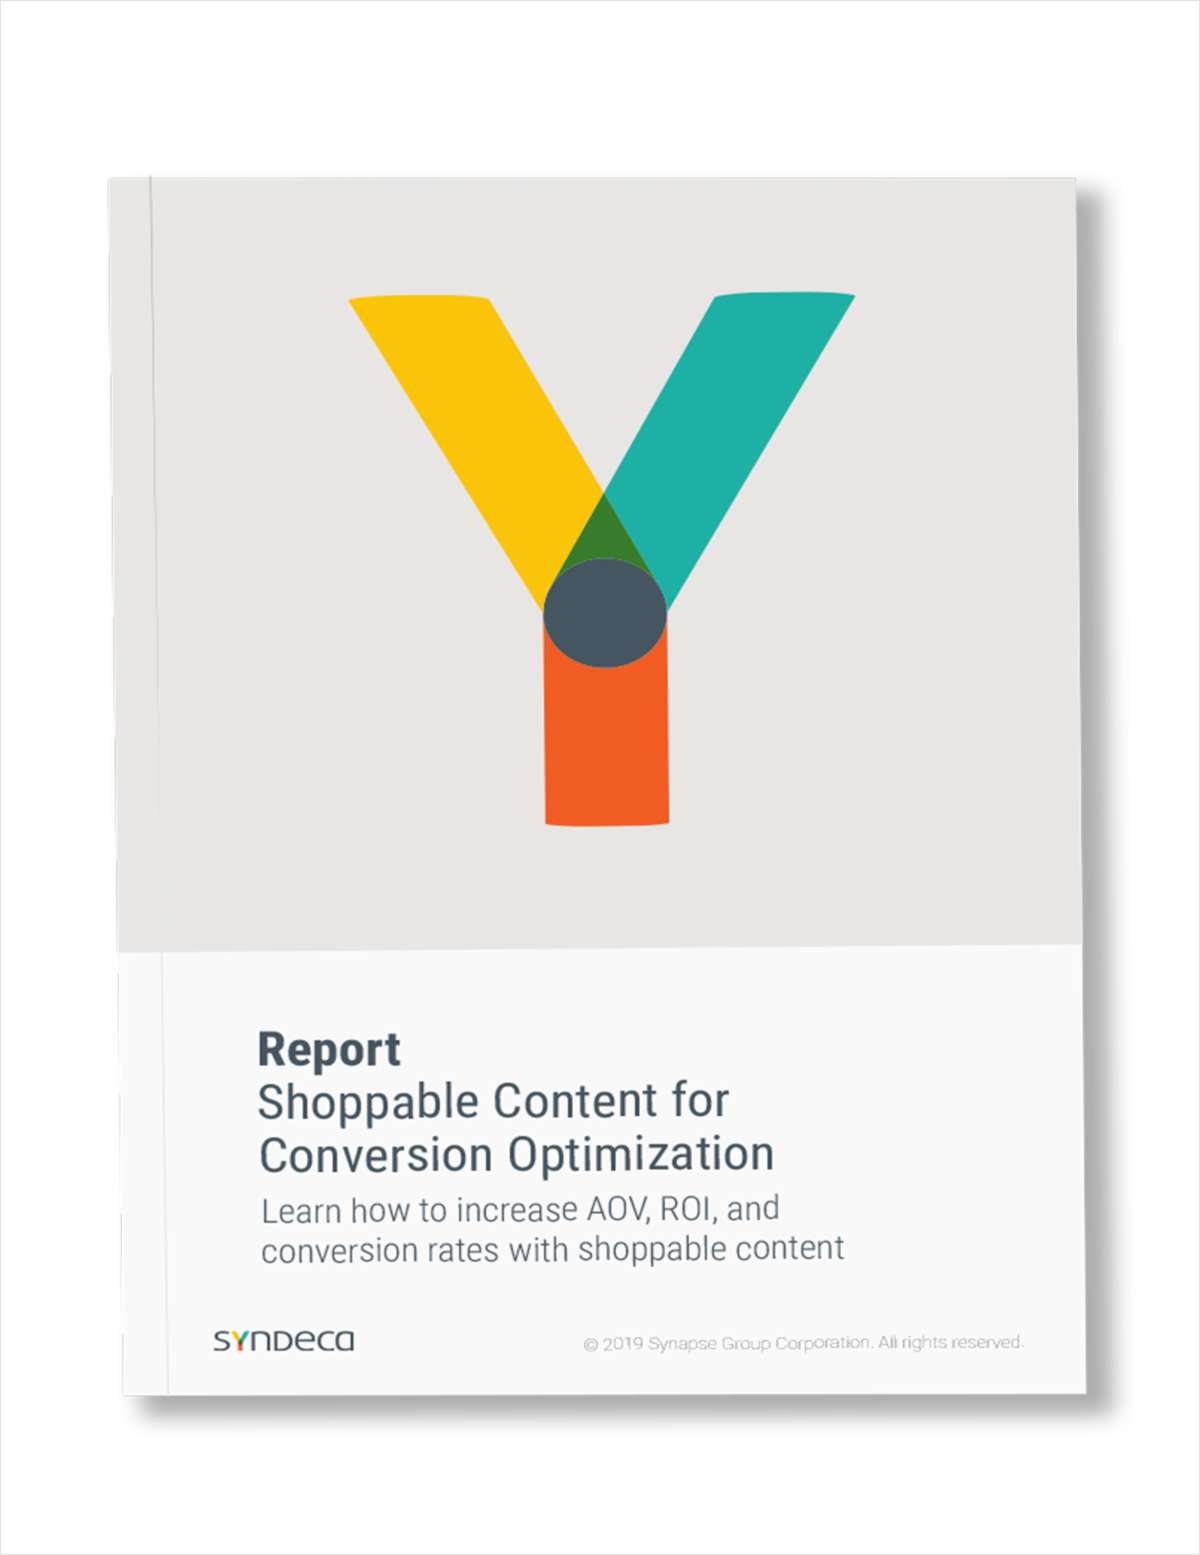 Report: Conversion Optimization with Shoppable Content